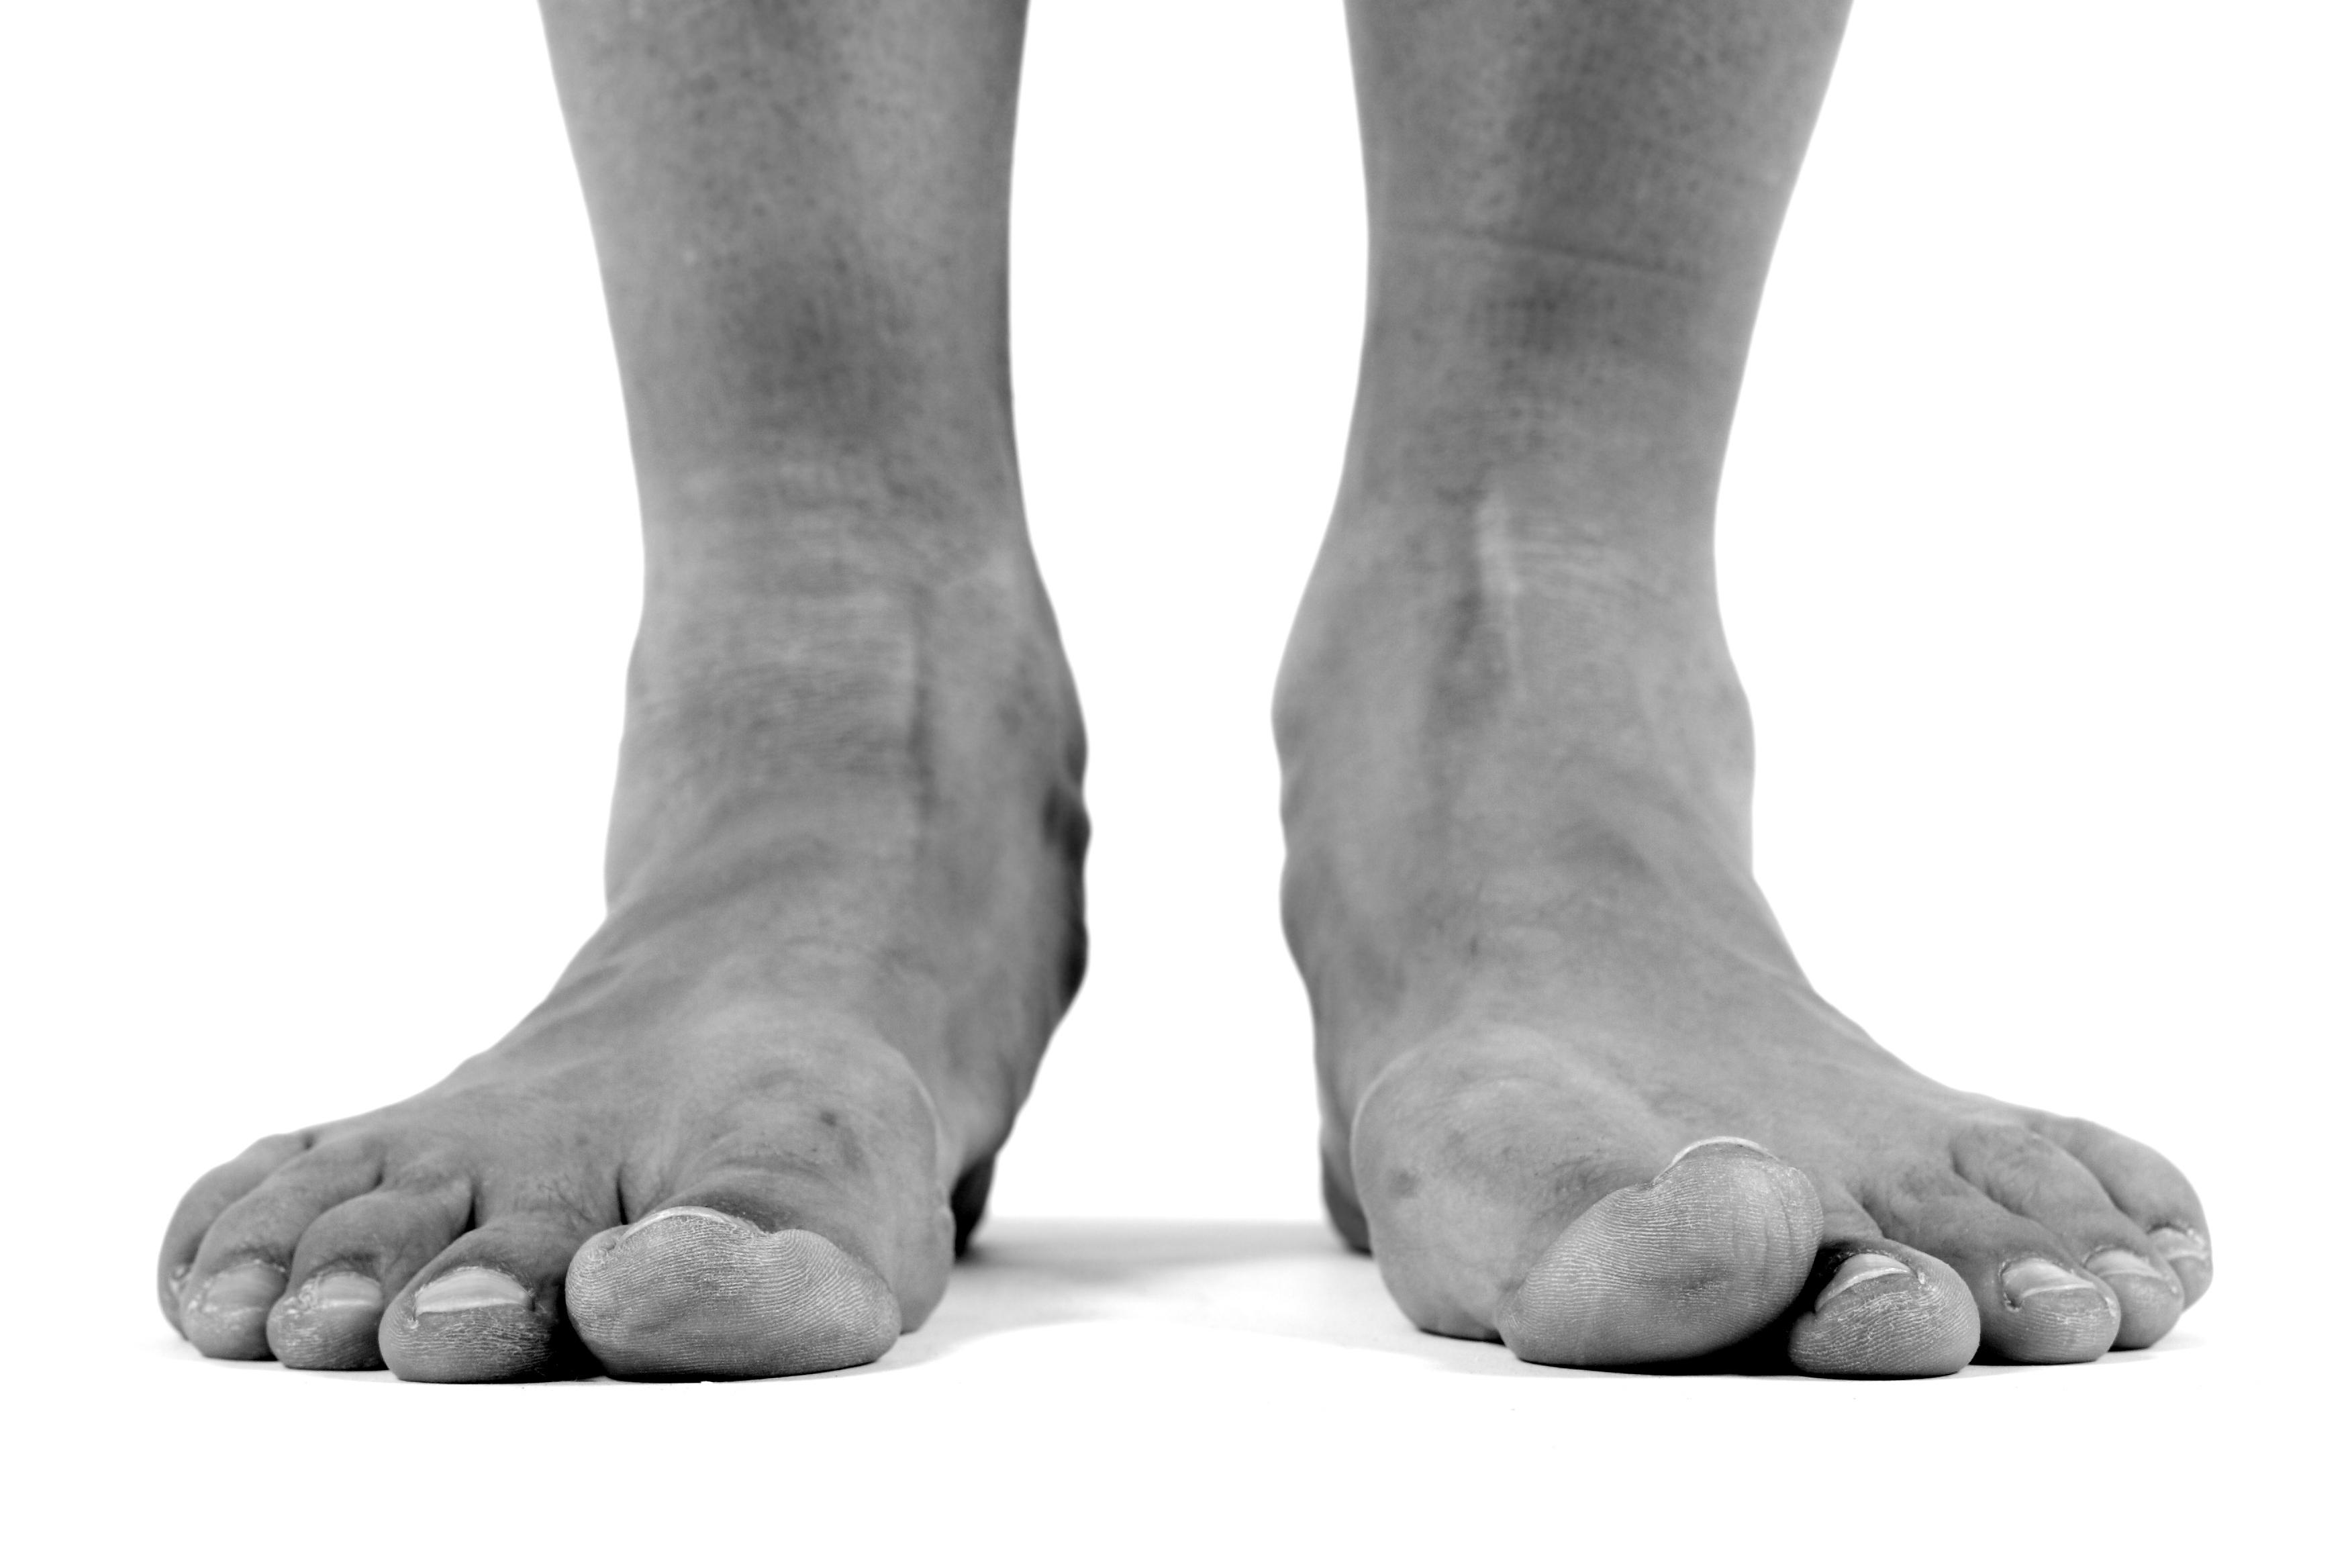 Surgical Flat Foot Correction Los Angeles Orthopedic Group 2 - Surgical Flat Foot Correction